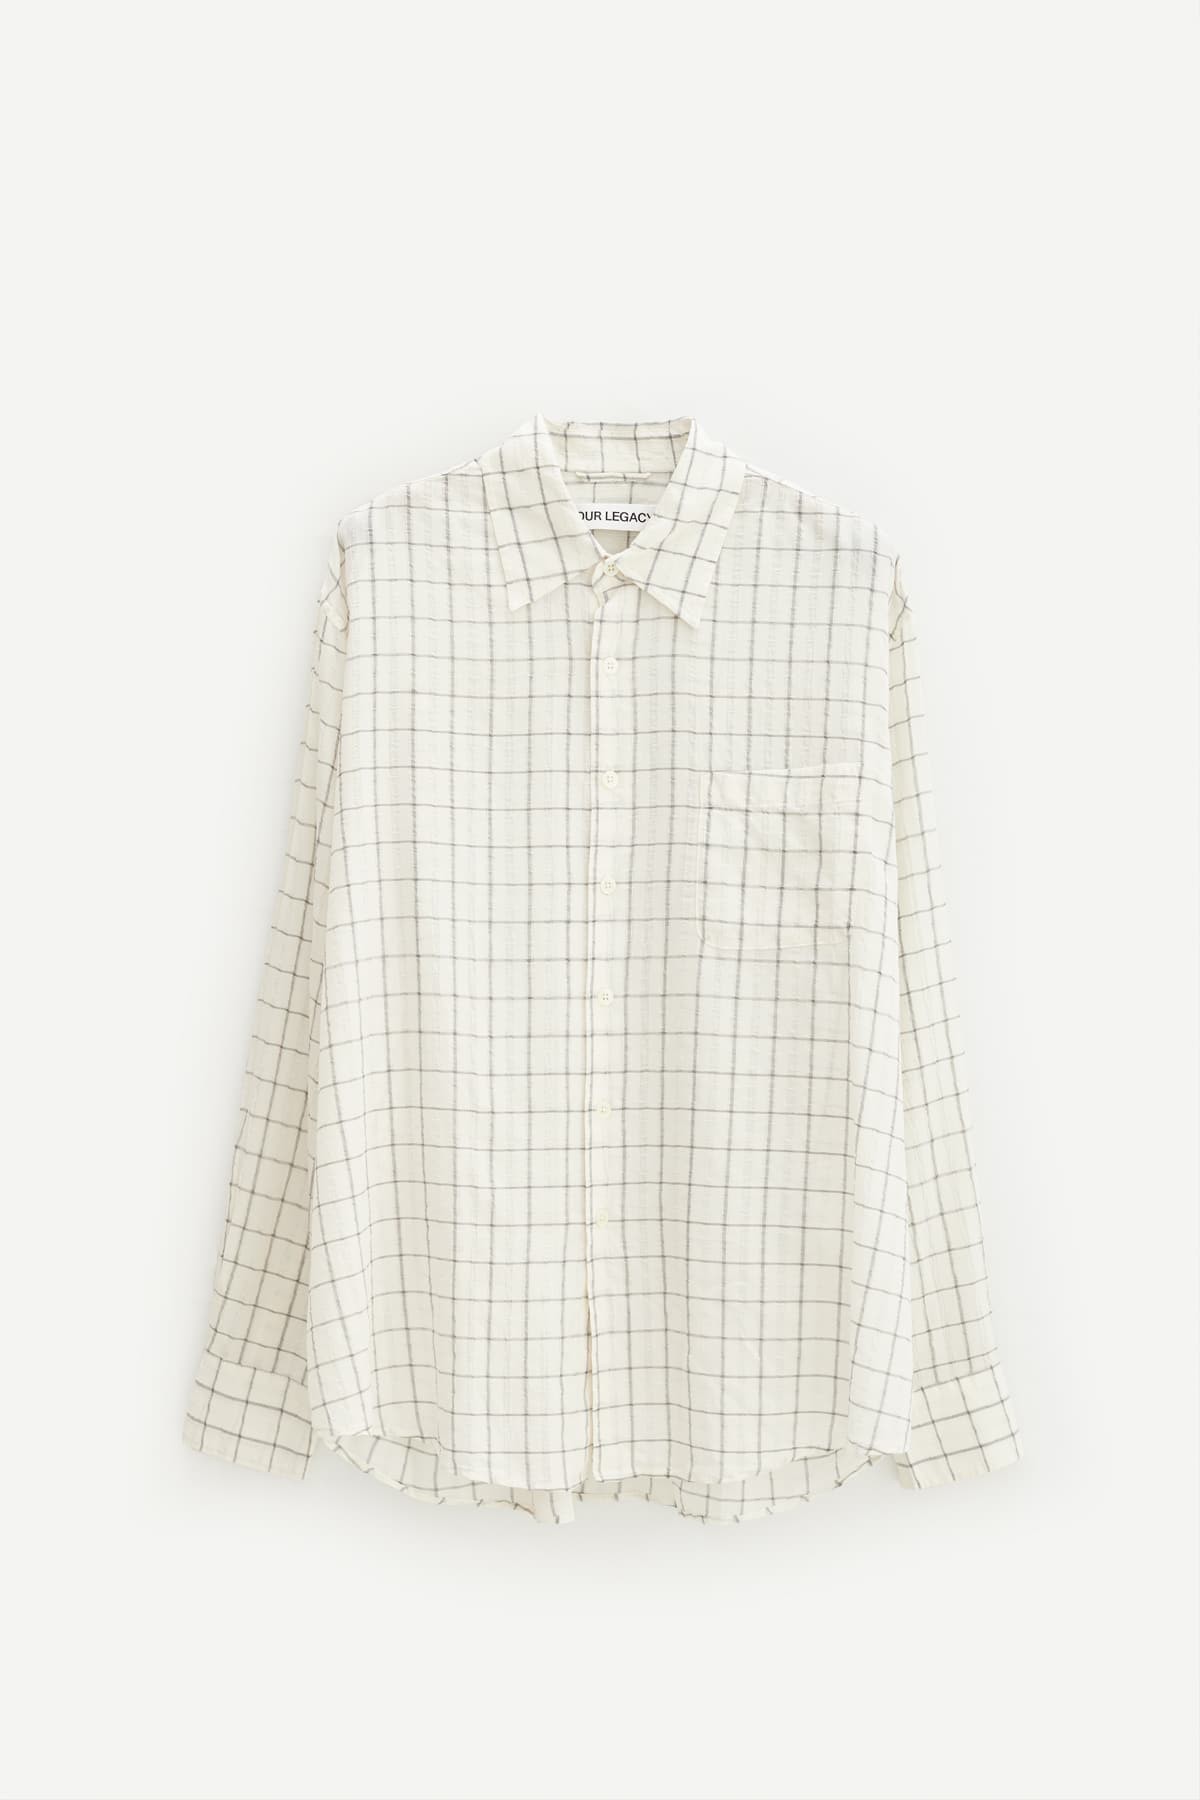 OUR LEGACY LIGHT MEDITERRANEAN CHECK ABOVE SHIRT IAMNUE